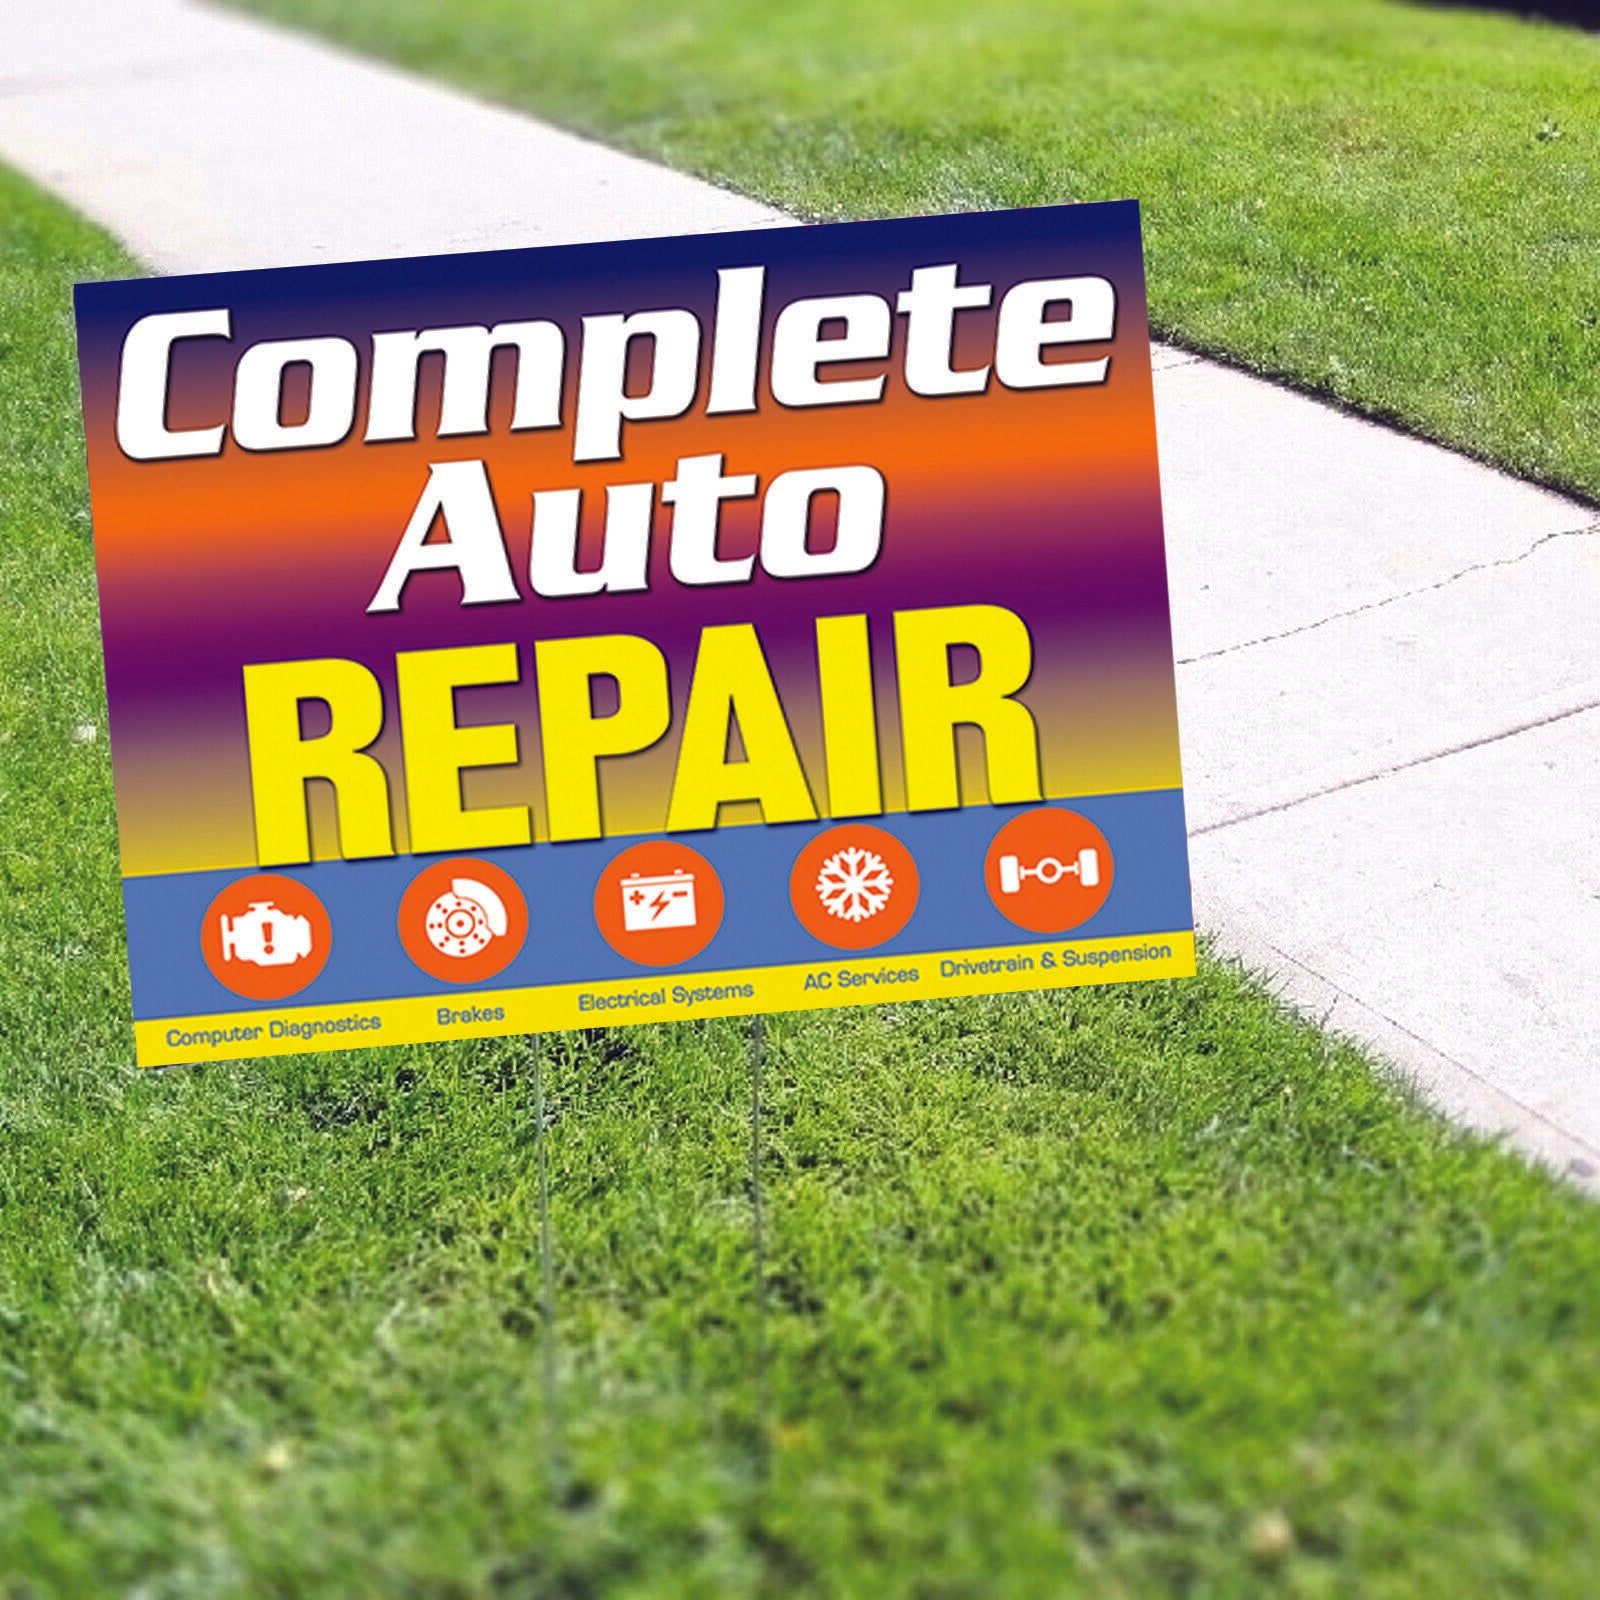 Complete Auto Repair Yard Sign